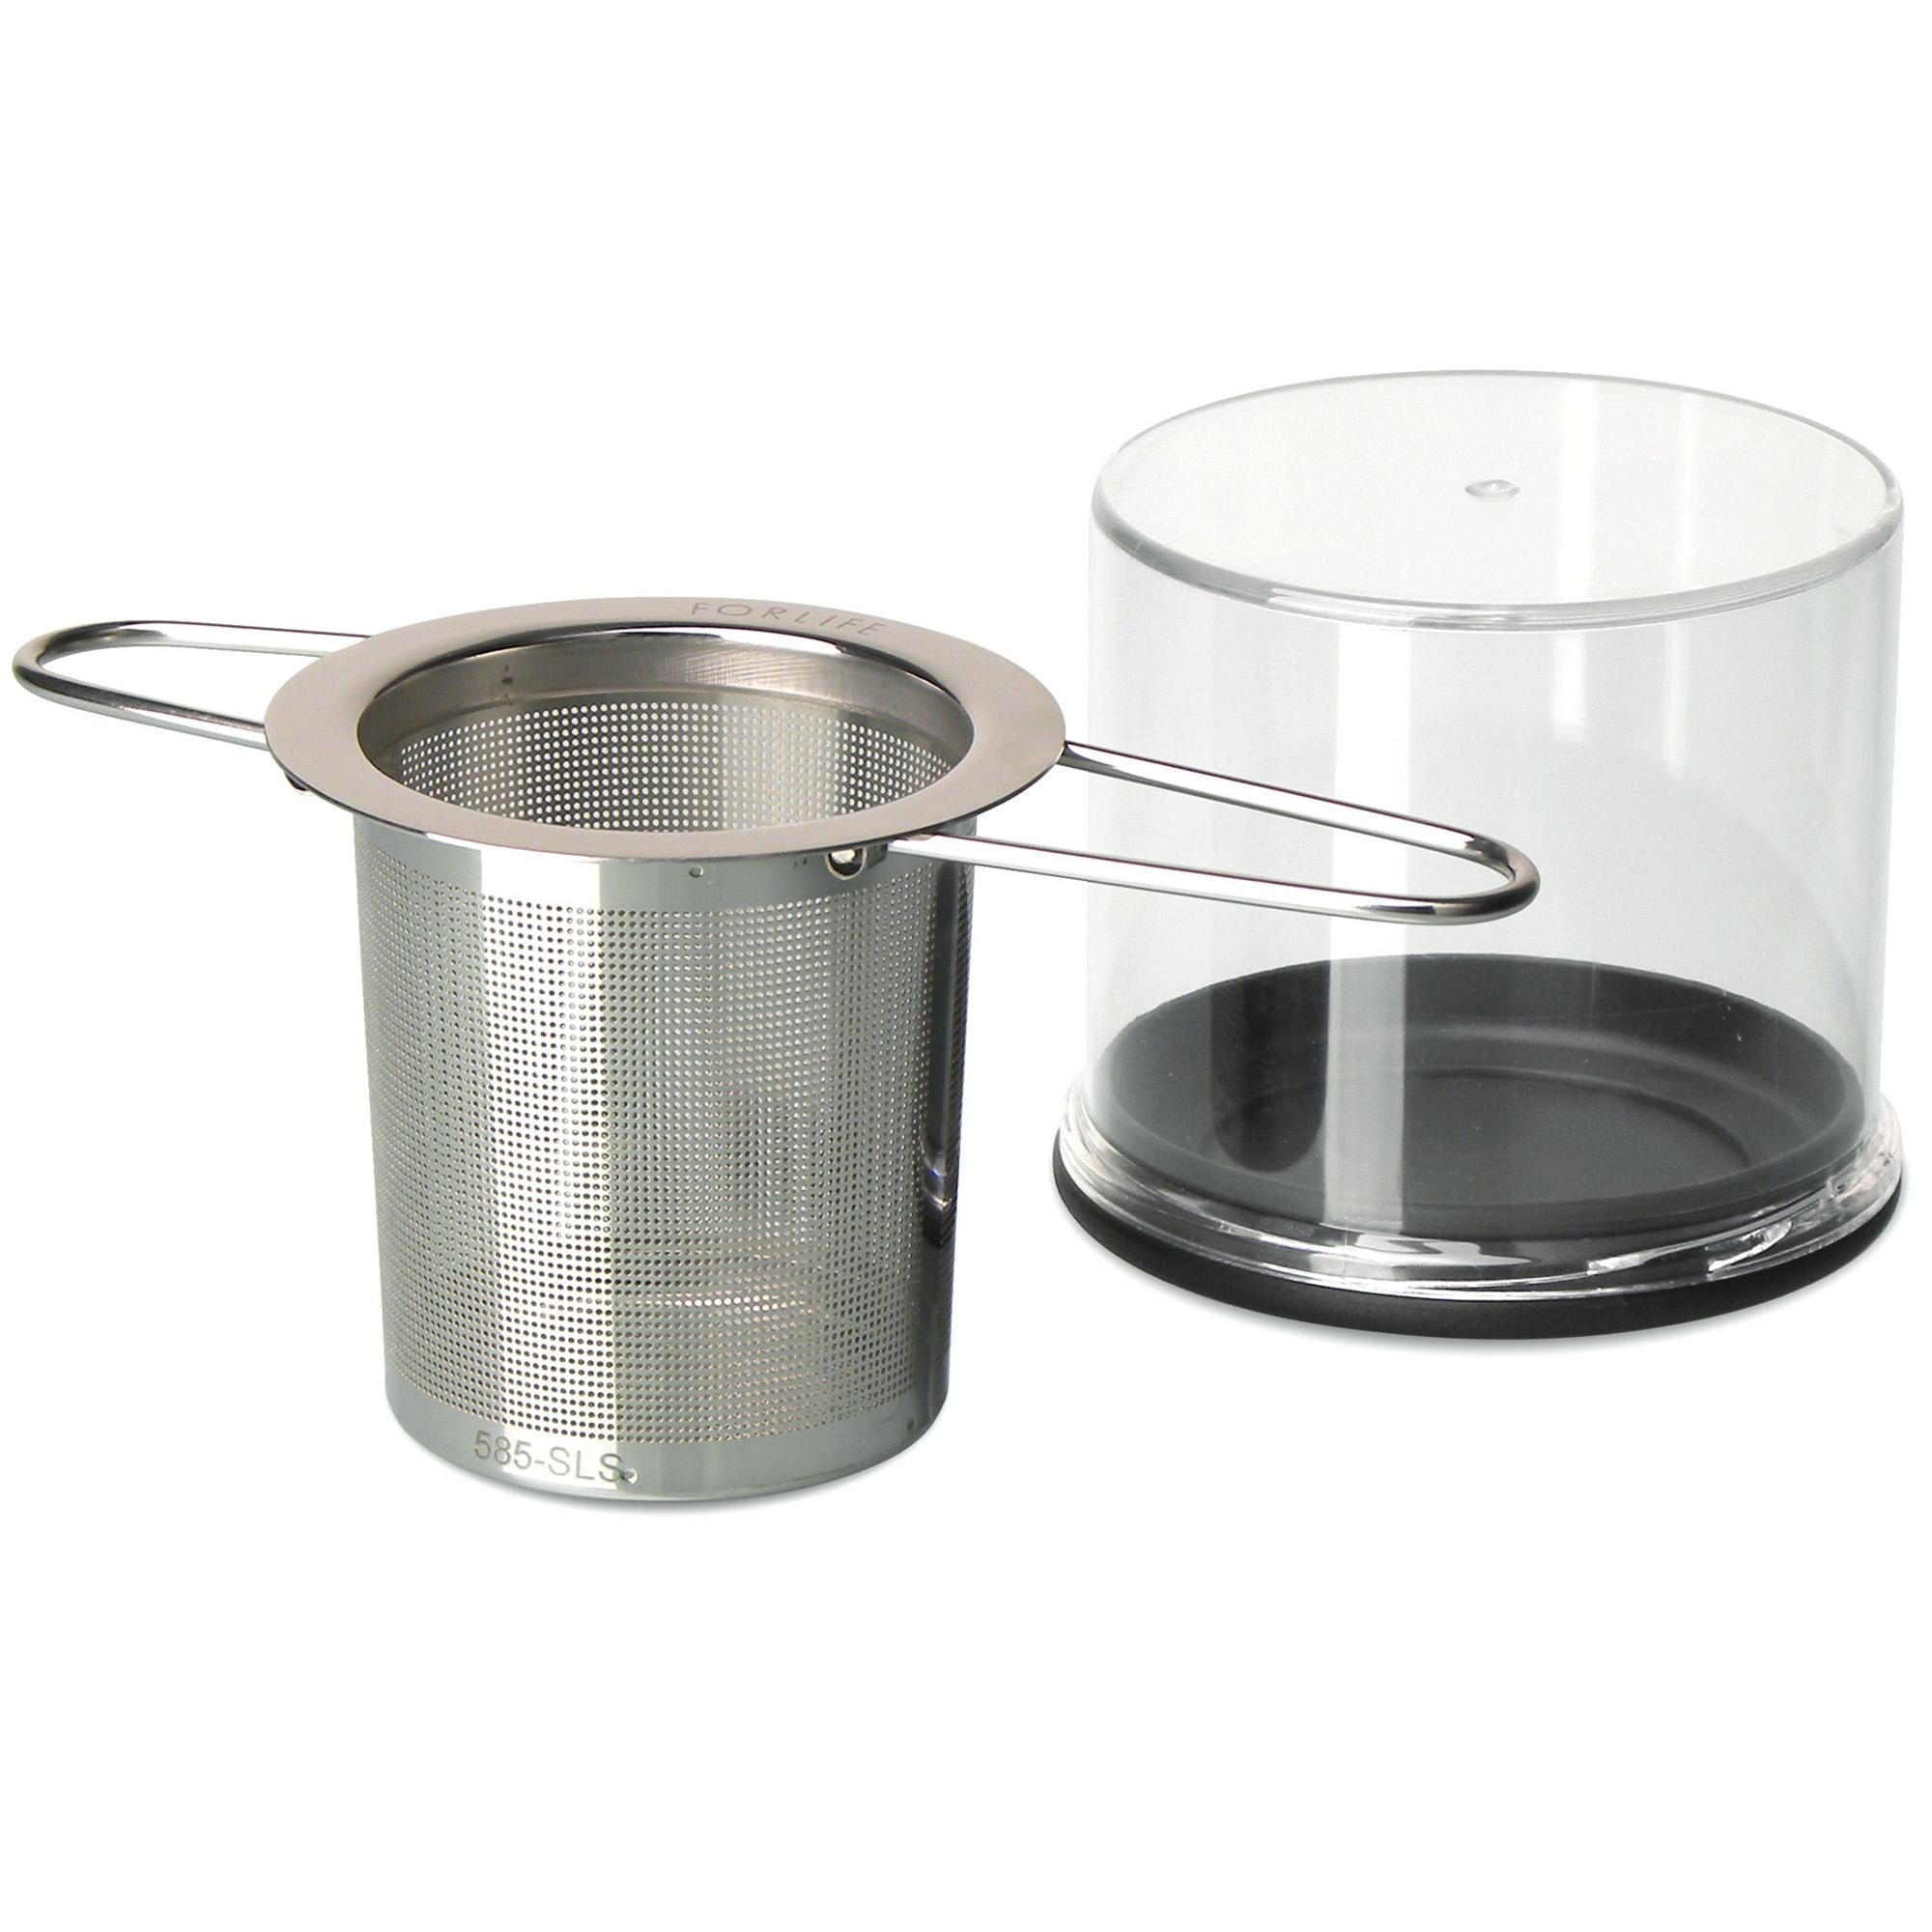 Stainless steel circular strainer with holes and two handles that are open.